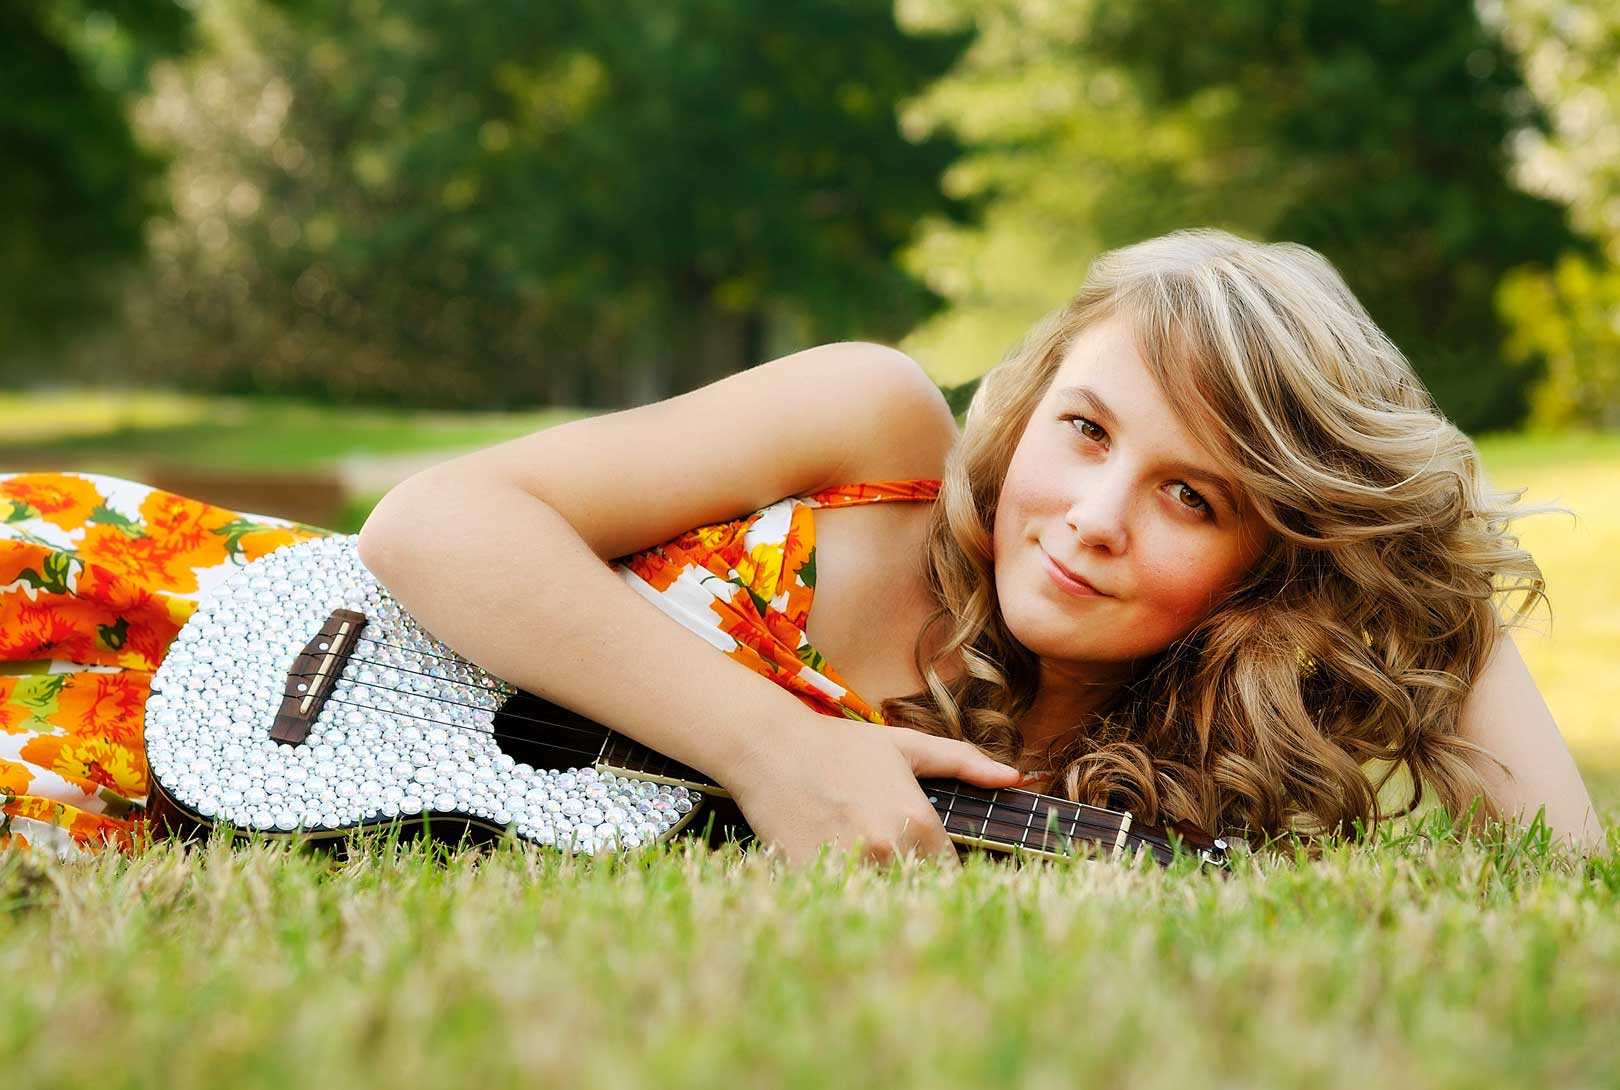 Carlie Mahnke lying in grass holding sparkly ukulele wearing an orange white and red floral dress